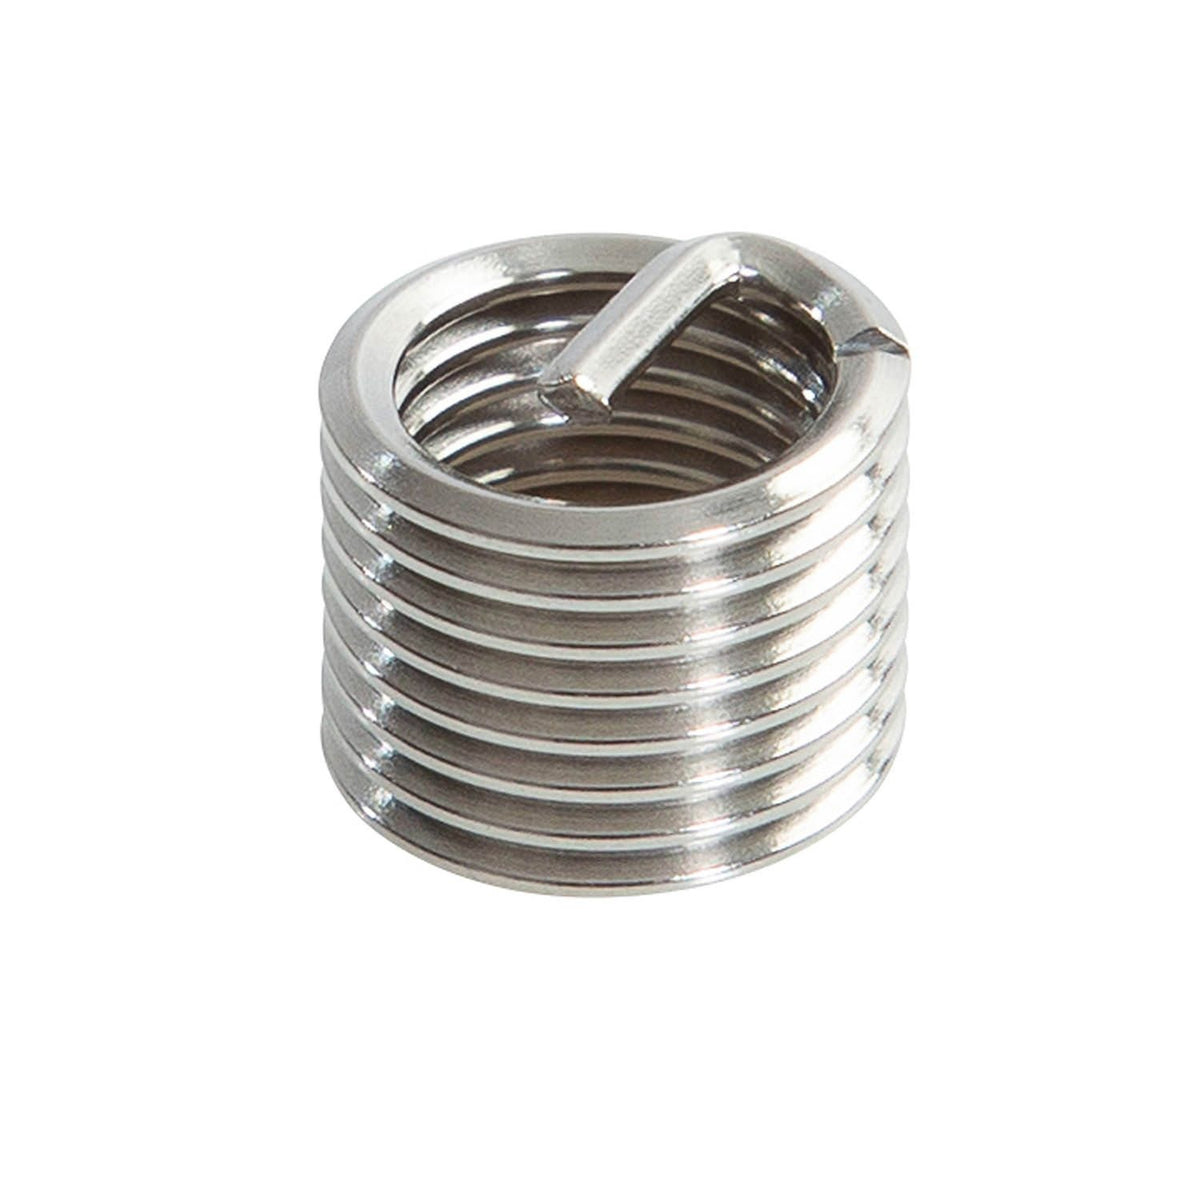 OEMTOOLS 25629 Helical Thread Insert, Stainless Steel